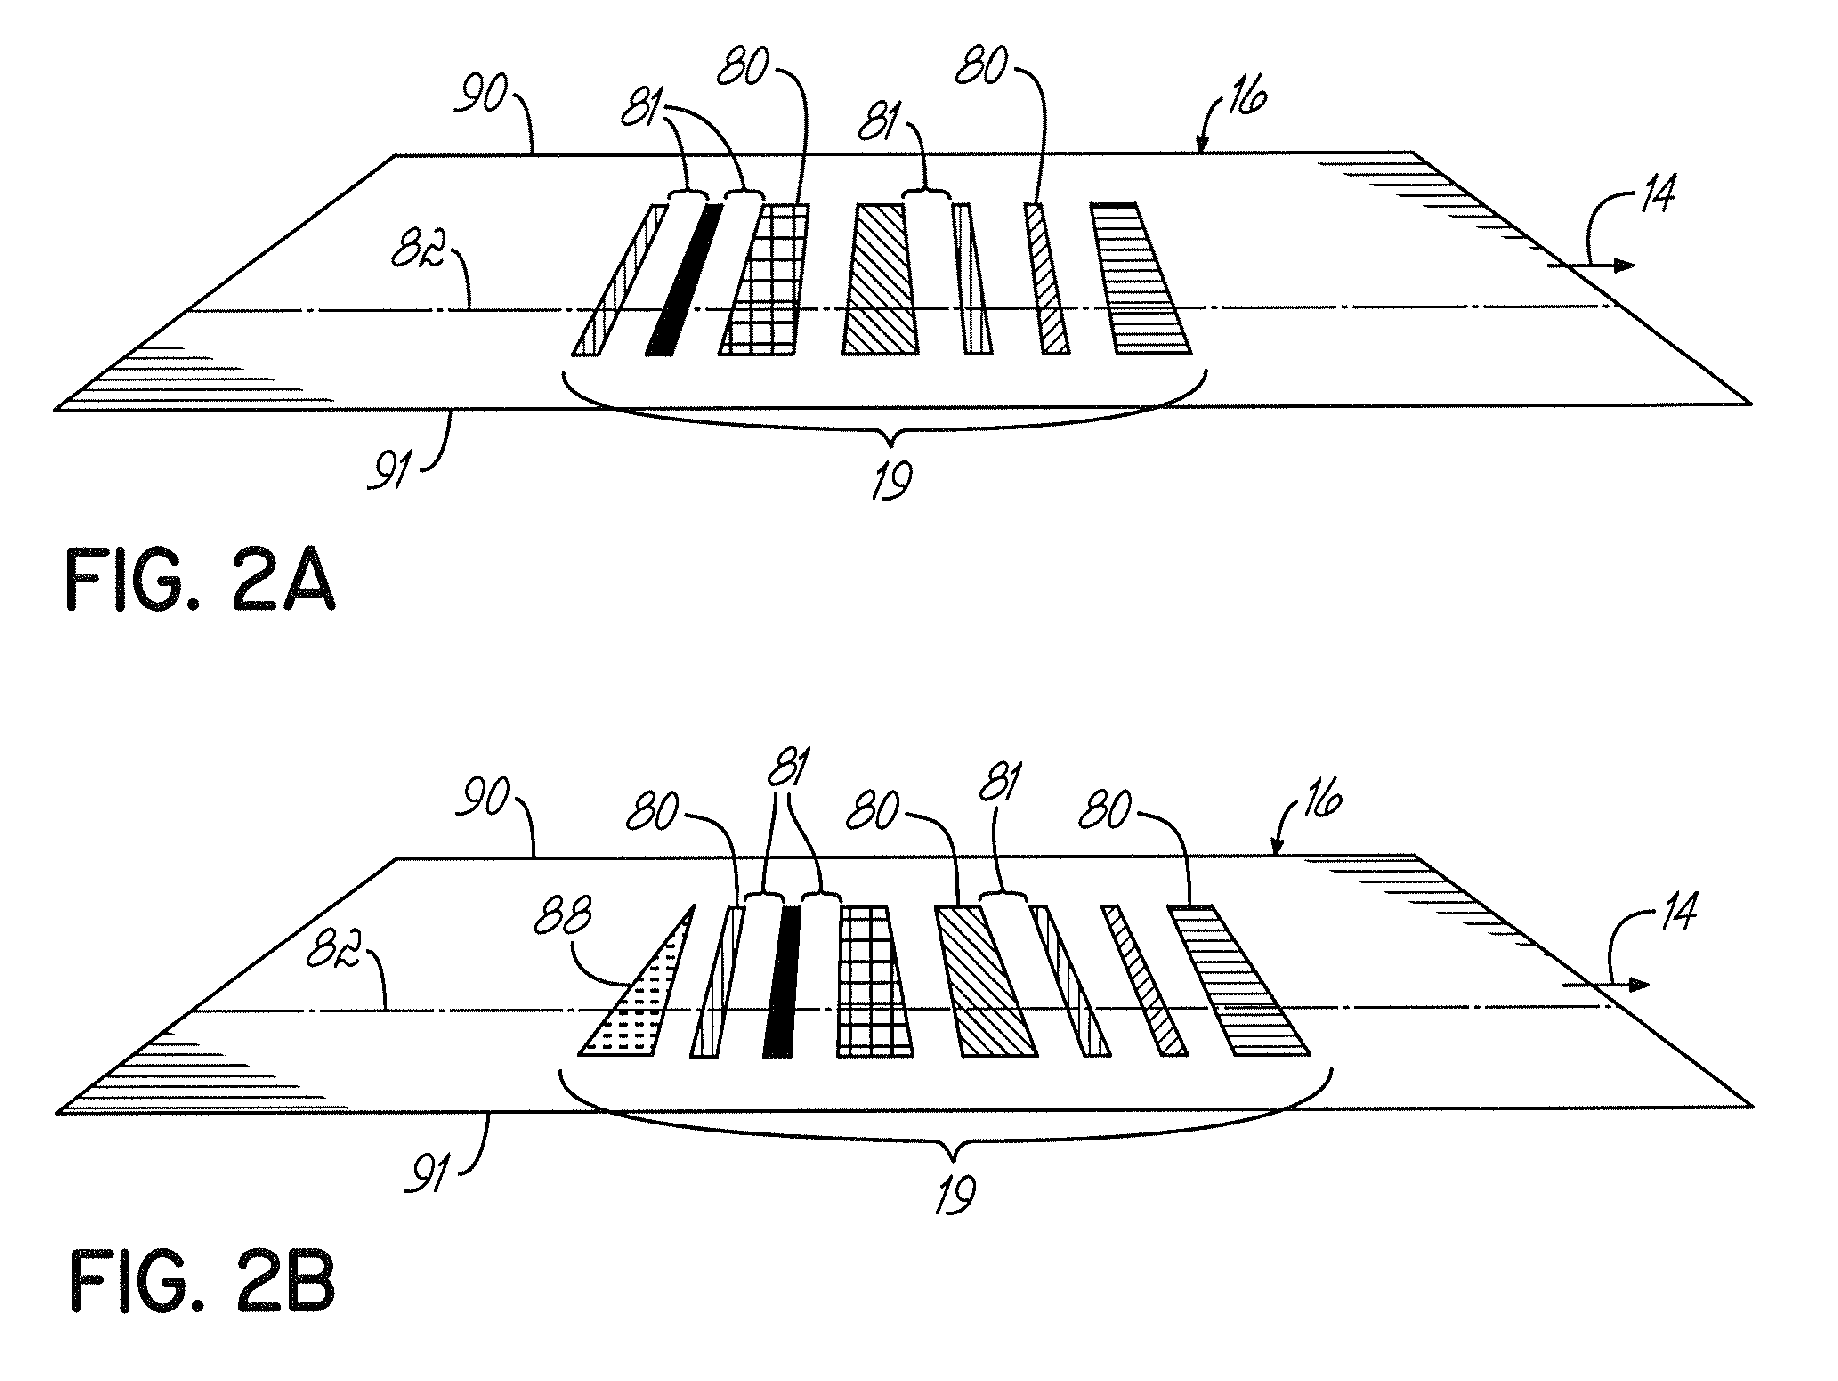 Apparatus and methods for high speed RGB color discrimination